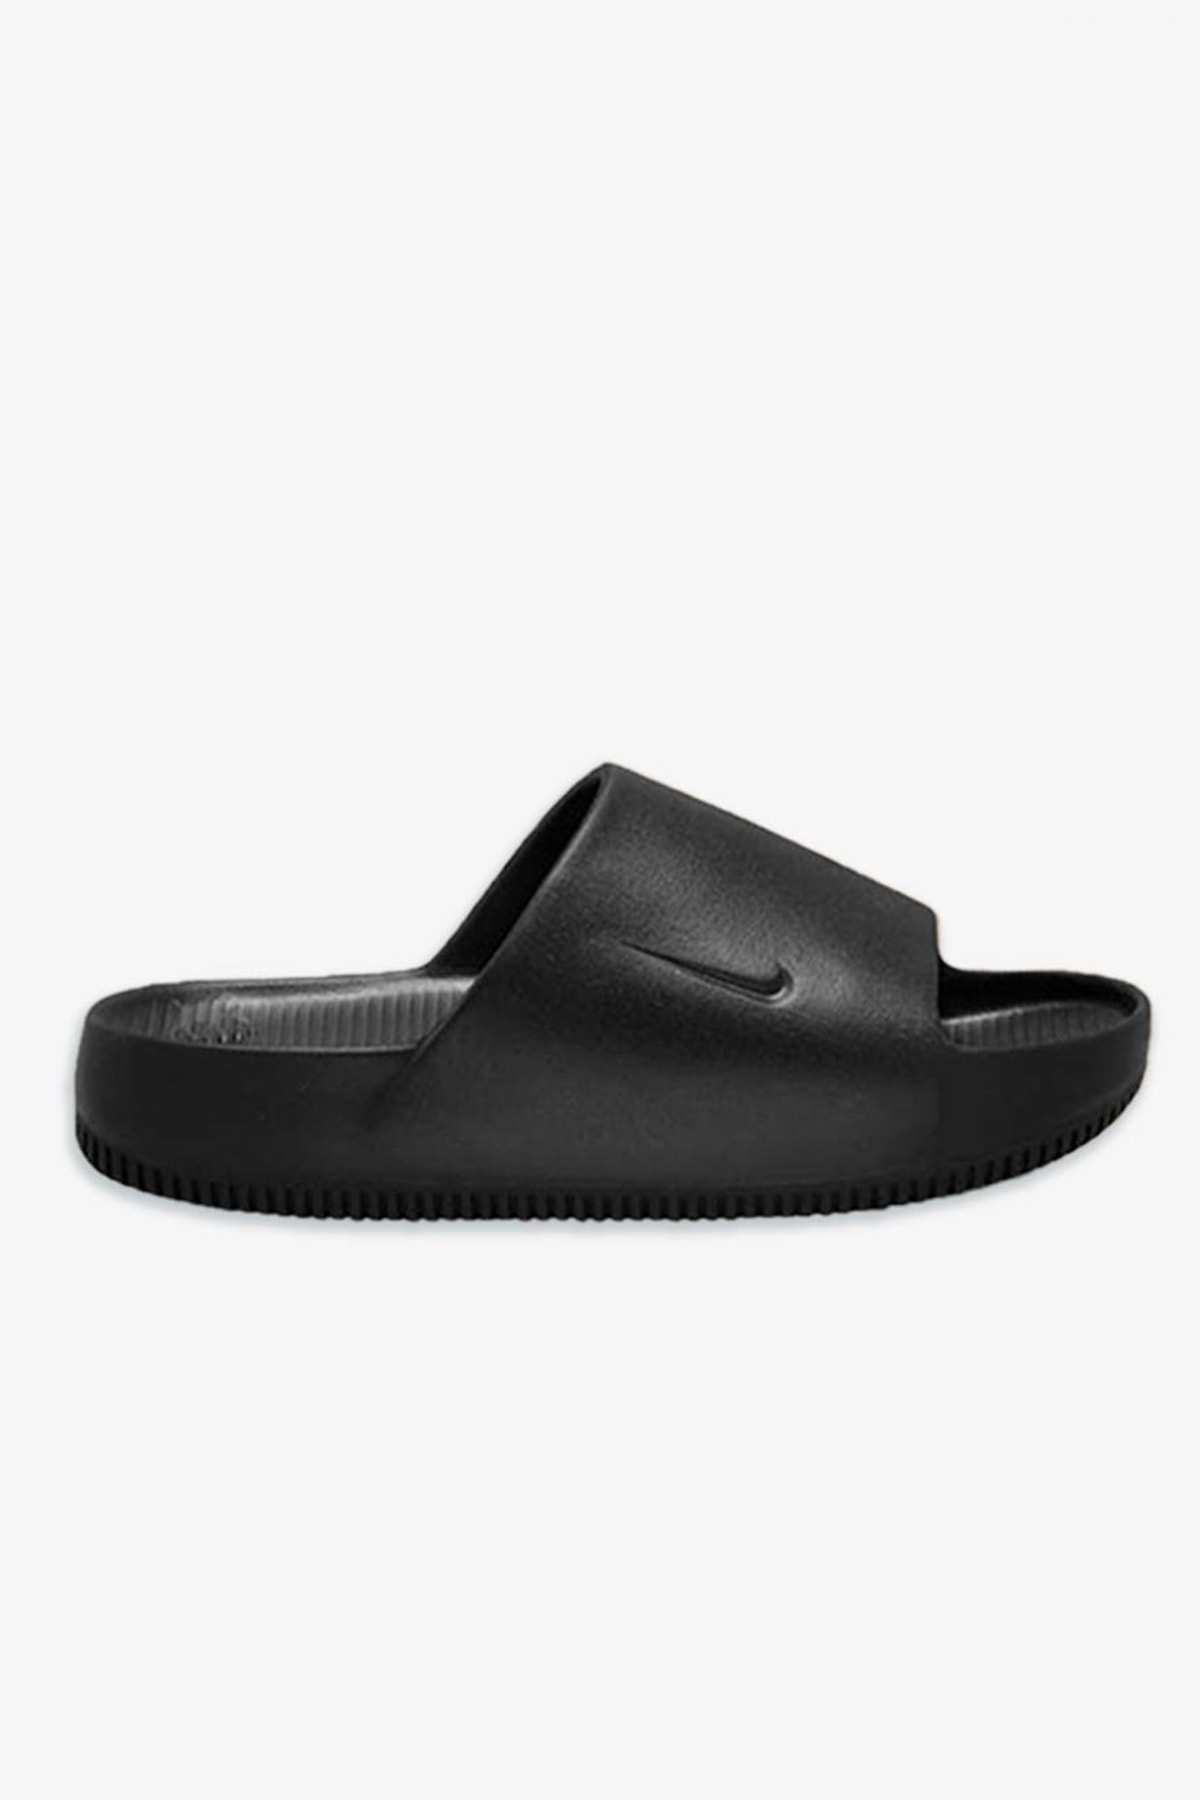 Nike Introduces Calm Slides Sandals Release Info